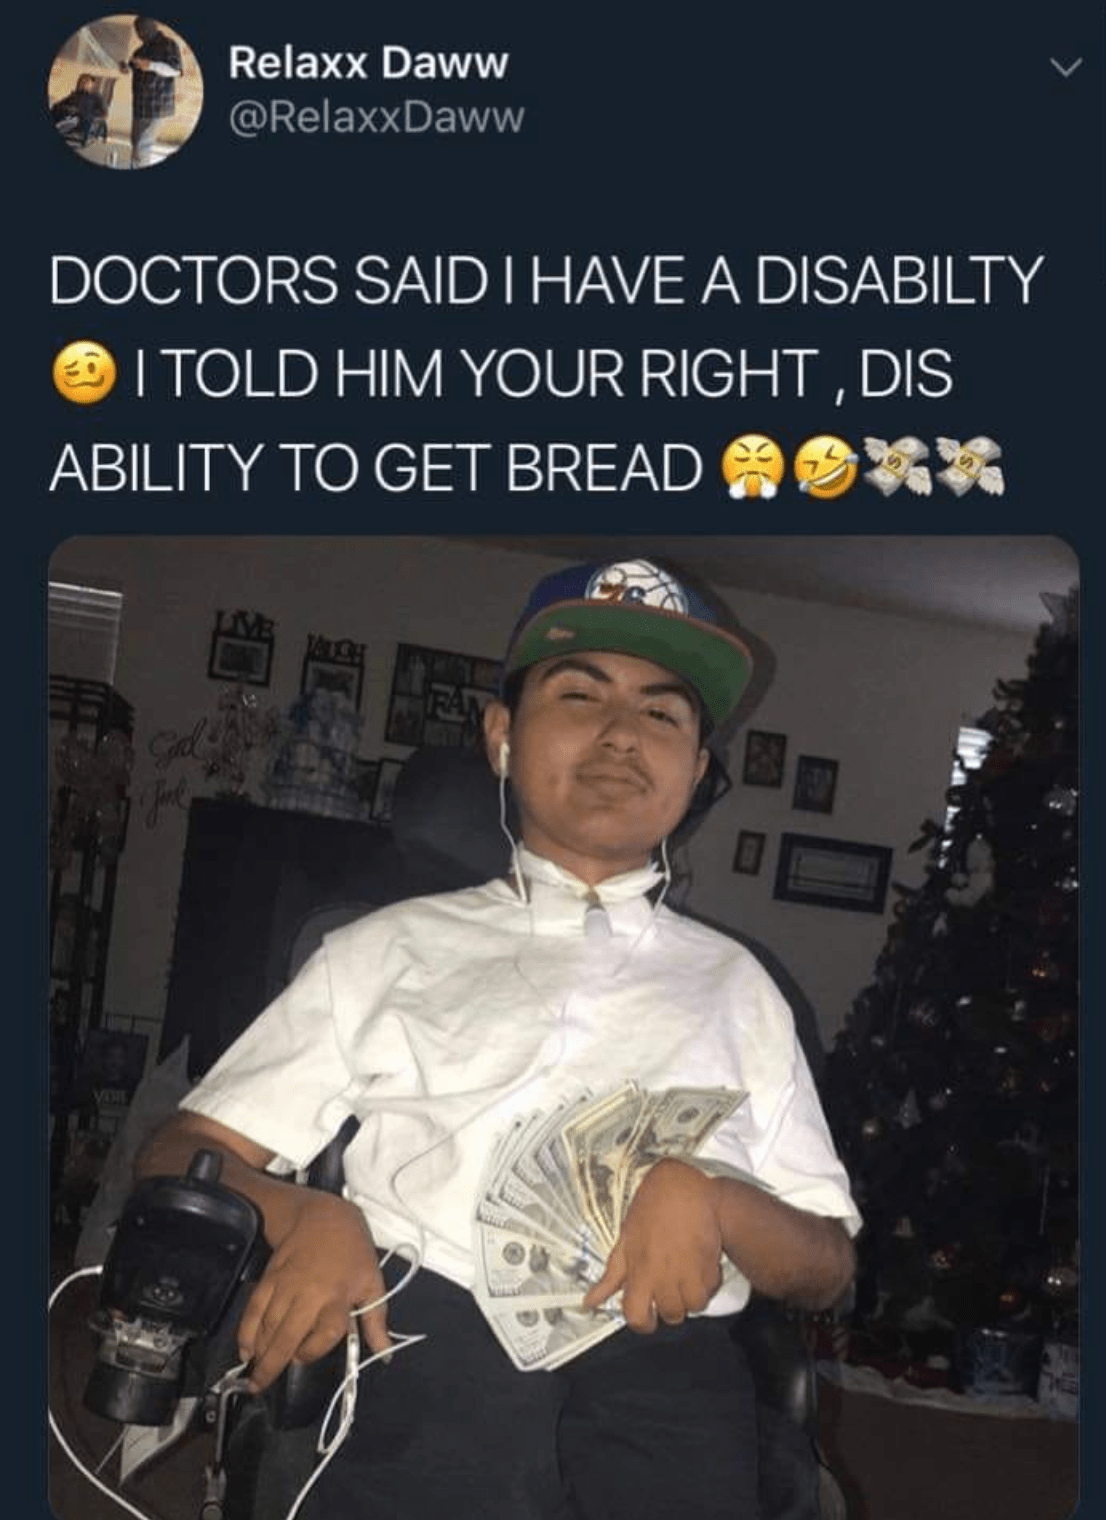 A meme from @RelaxDaww. There is text above a photograph. The text reads “DOCTORS SAID I HAVE A DISABILITY (cringe emoji) I TOLD HIM YOUR [sic] RIGHT, DIS ABILITY TO GET BREAD (steam coming out of nose emoji)(crying laughing emoji)(two money with wings emojis). The photograph shows a person with brown hair and brown skin wearing a cap, a white shirt and black trousers. They are holding a stack of dollar bills in their hand. They are sitting in an electric wheelchair. Their chin is lifted and they are smirking as if to say “and what??”. They are in what looks like a home environment with pictures hanging on the wall and a christmas tree in the background.  